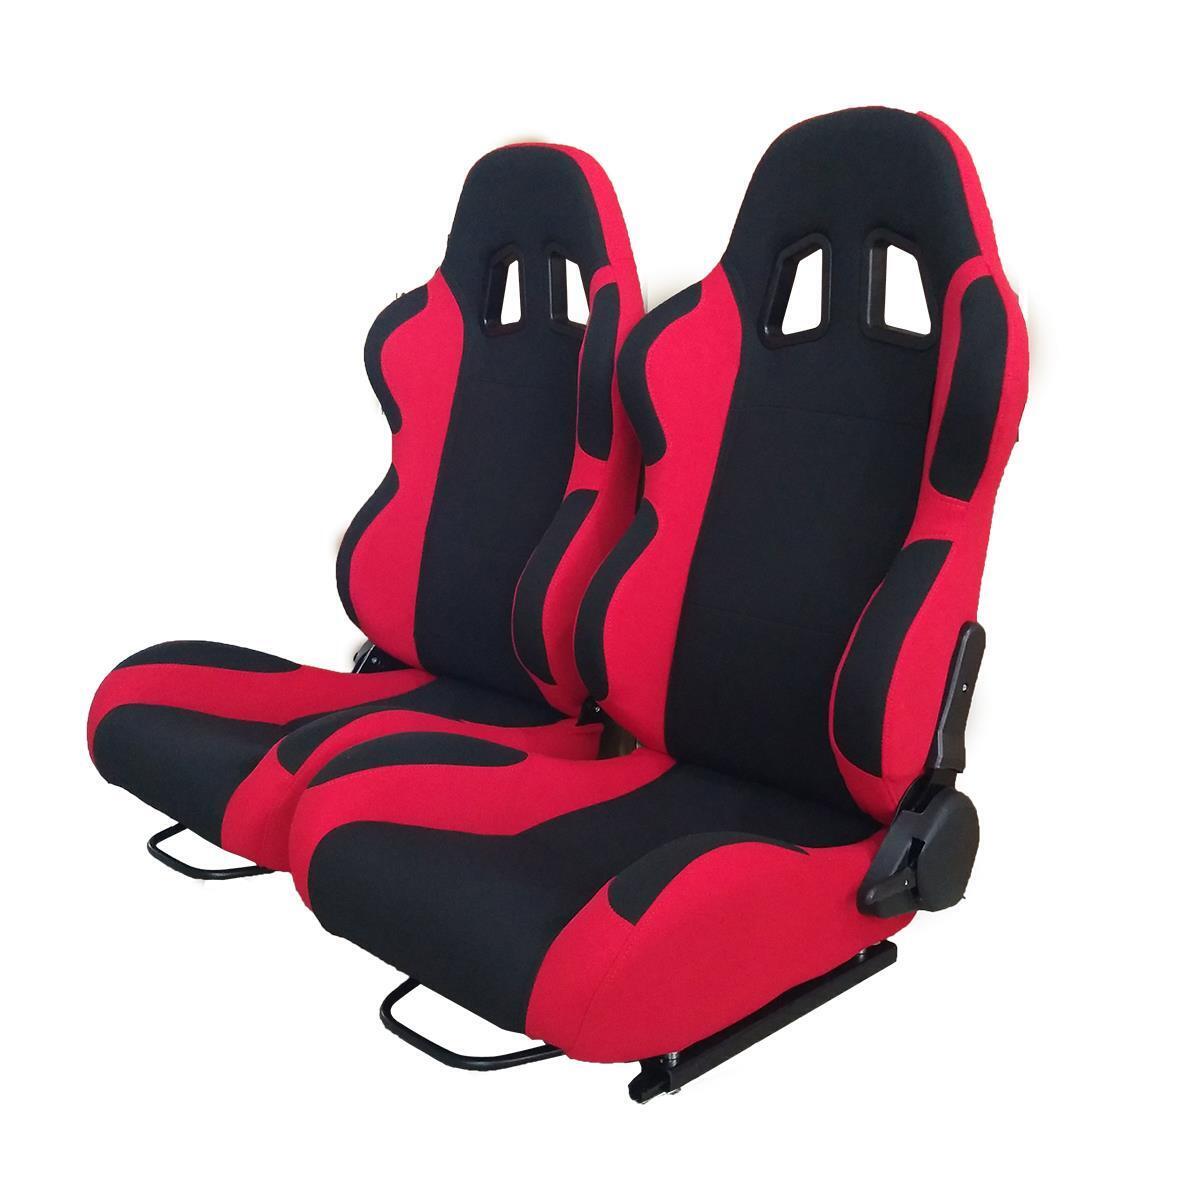 New High Quality Universal Racing Seats Left+Right Double Slide Racing Seat